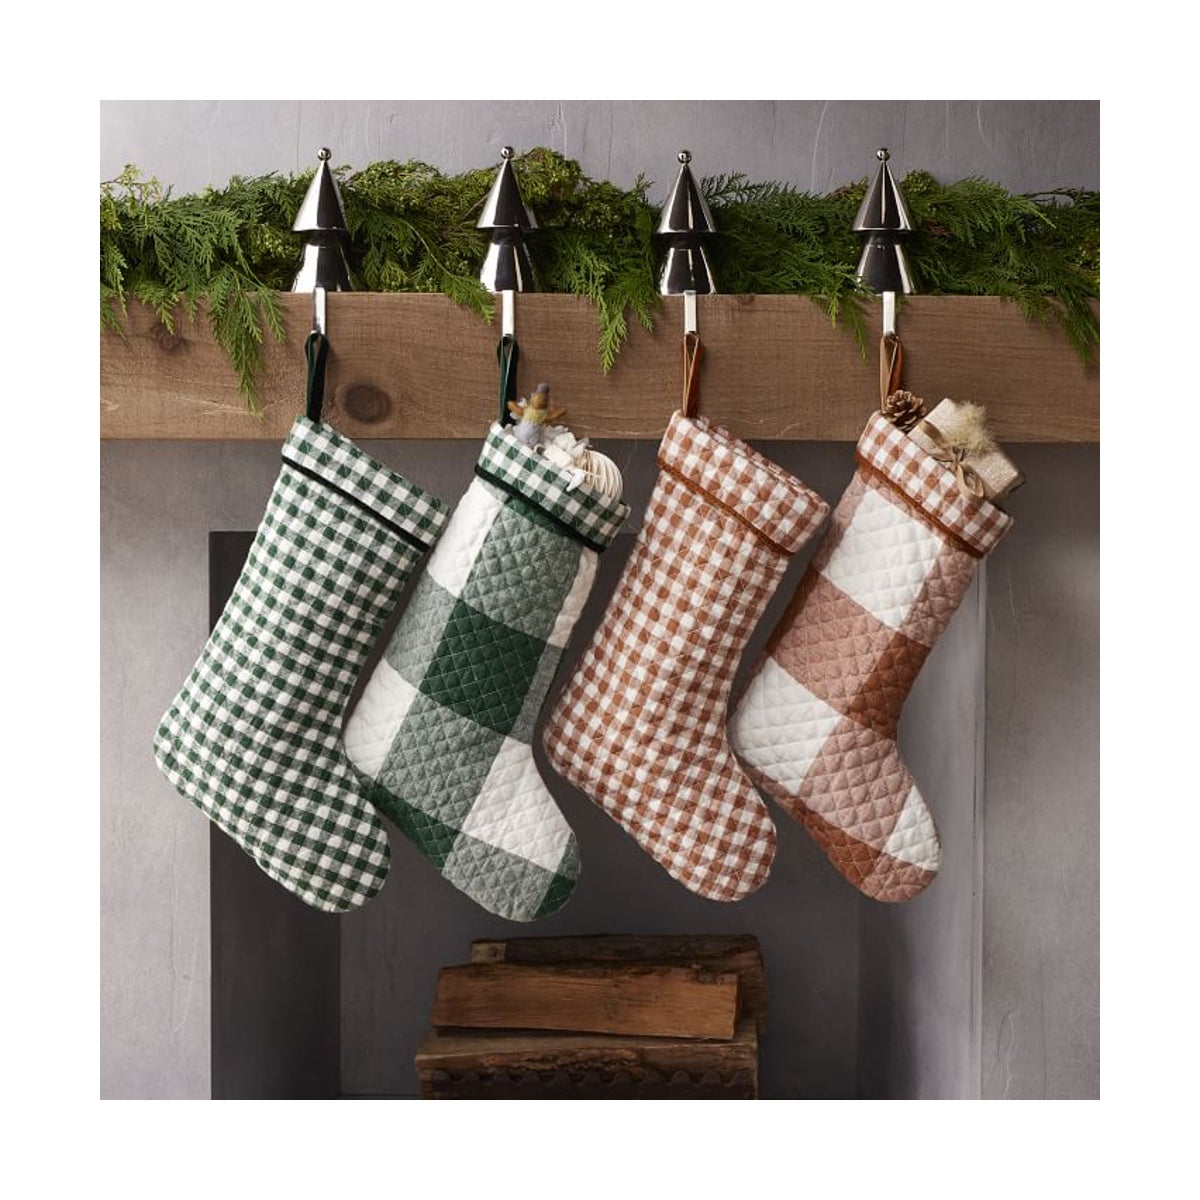 Best Christmas Stockings Option: Heather Taylor Home x West Elm Gingham Stockings